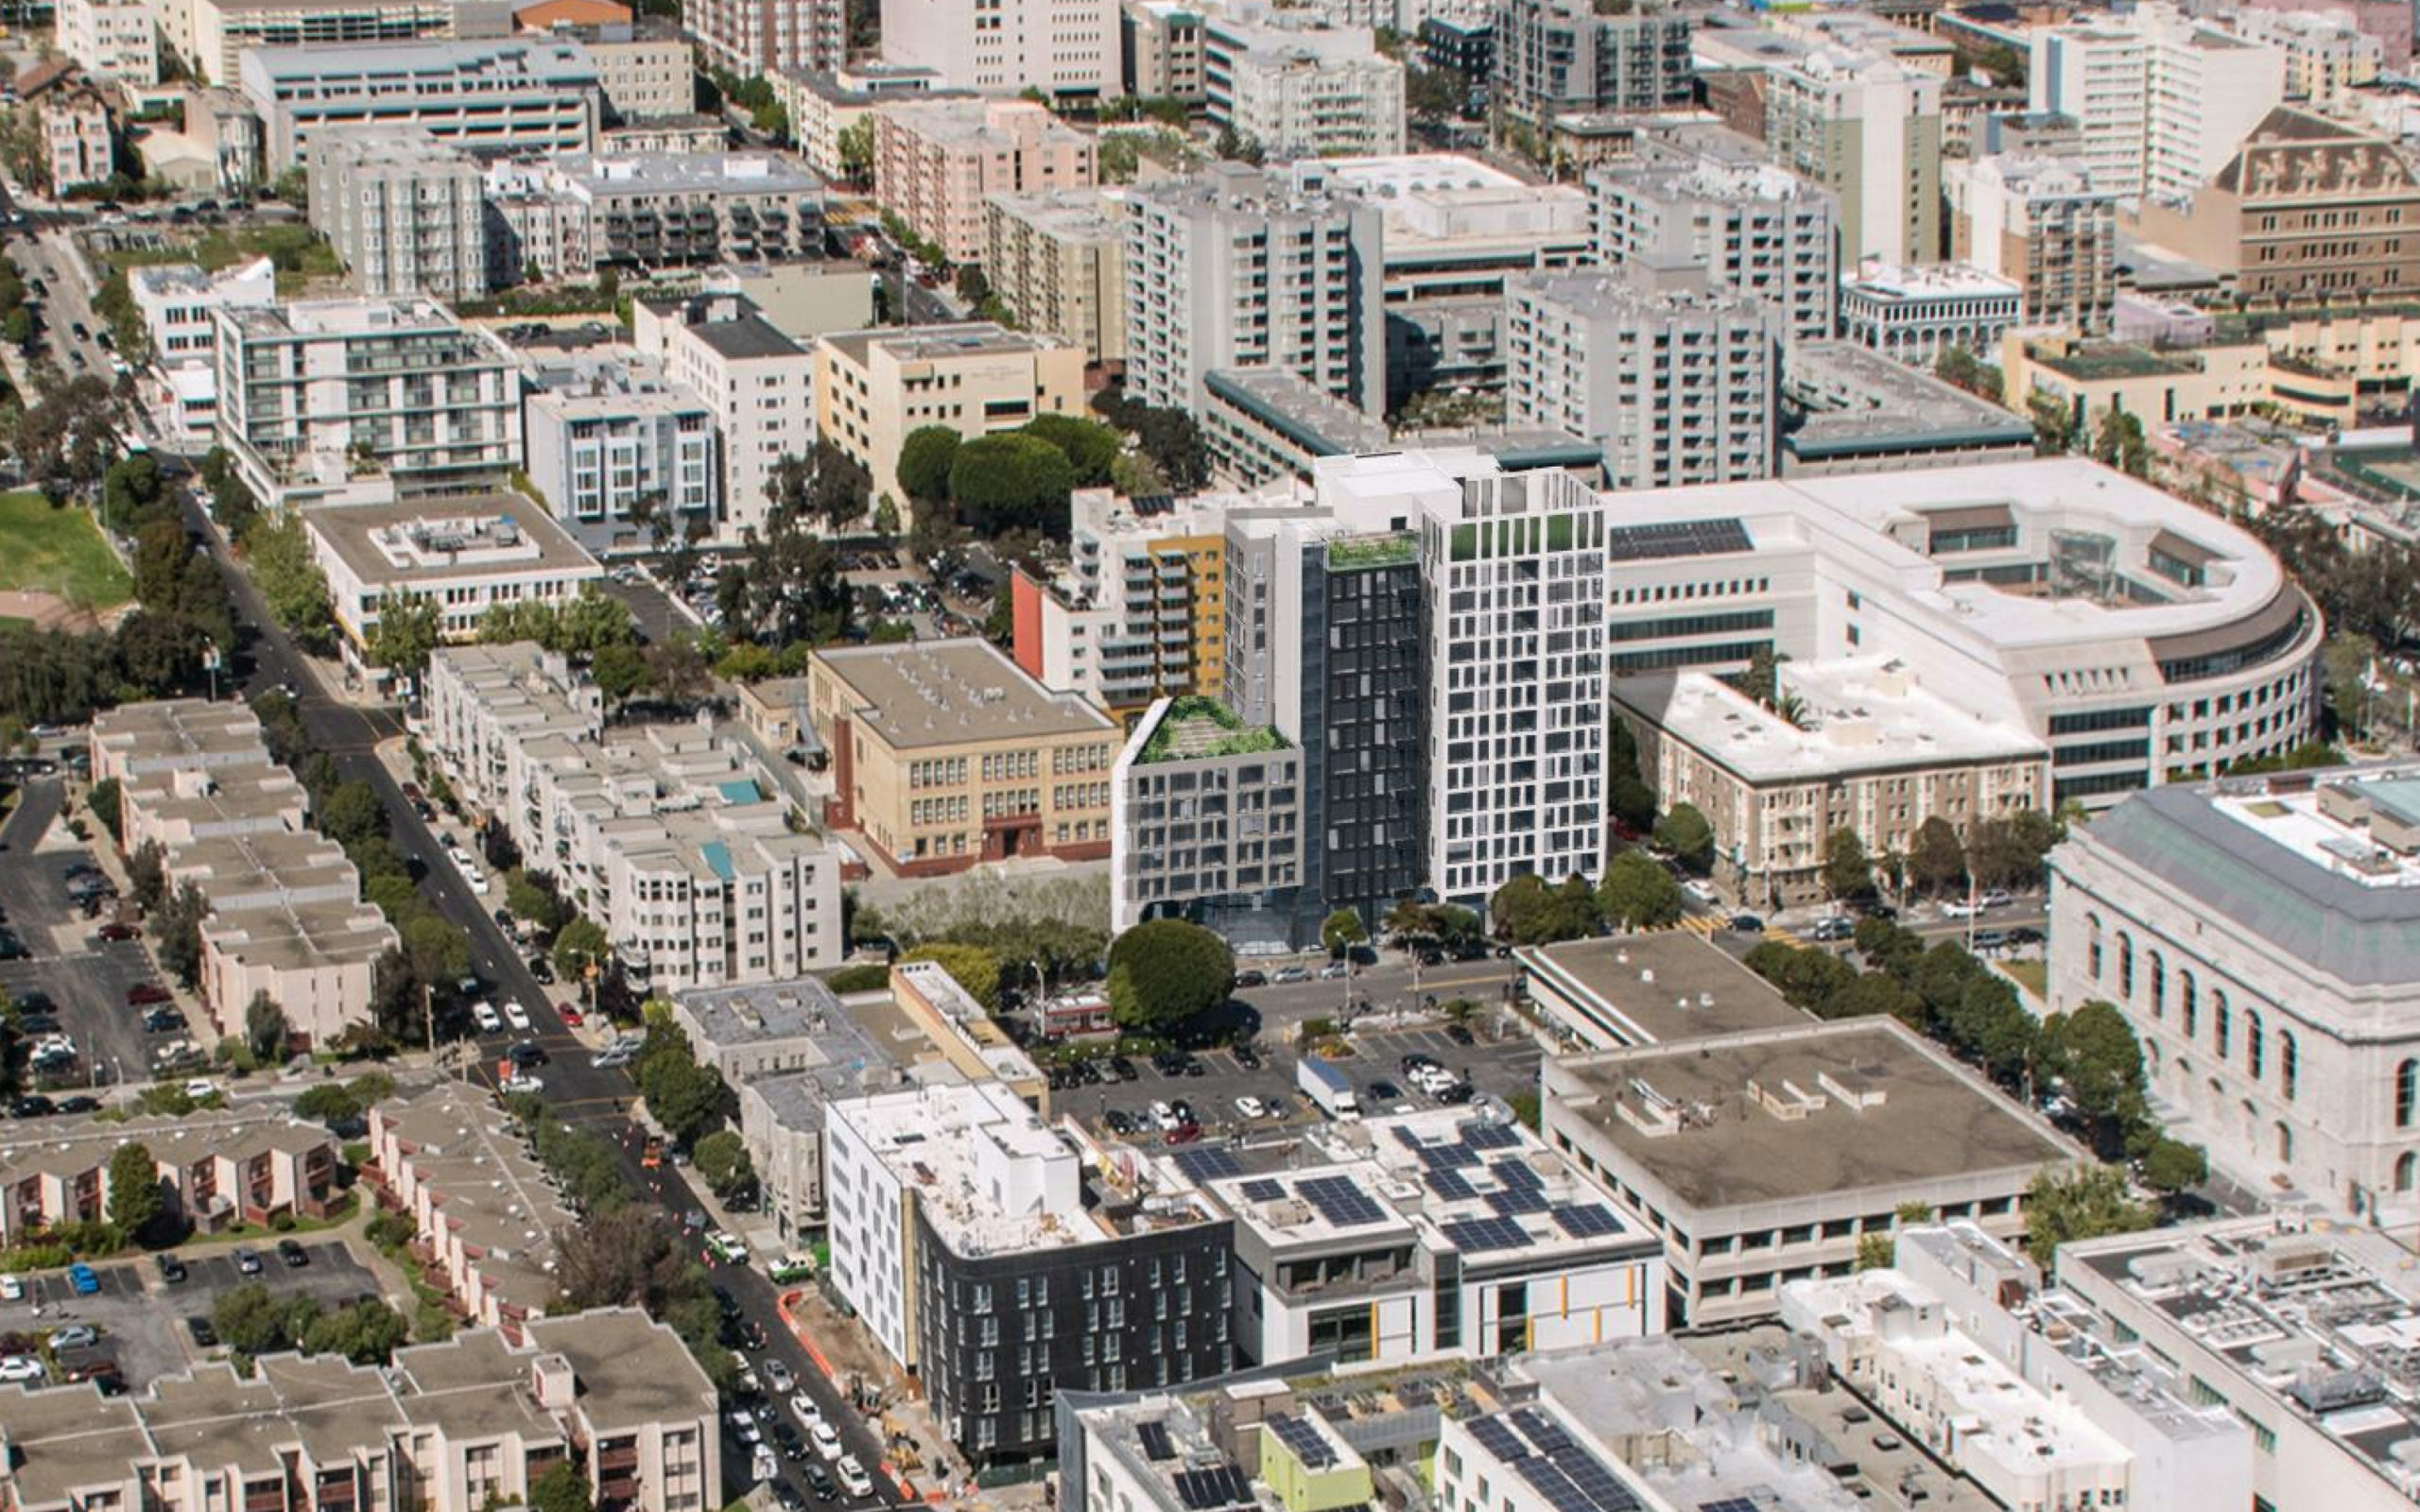 600 McAllister Street aerial perspective, rendering by David Baker Architects